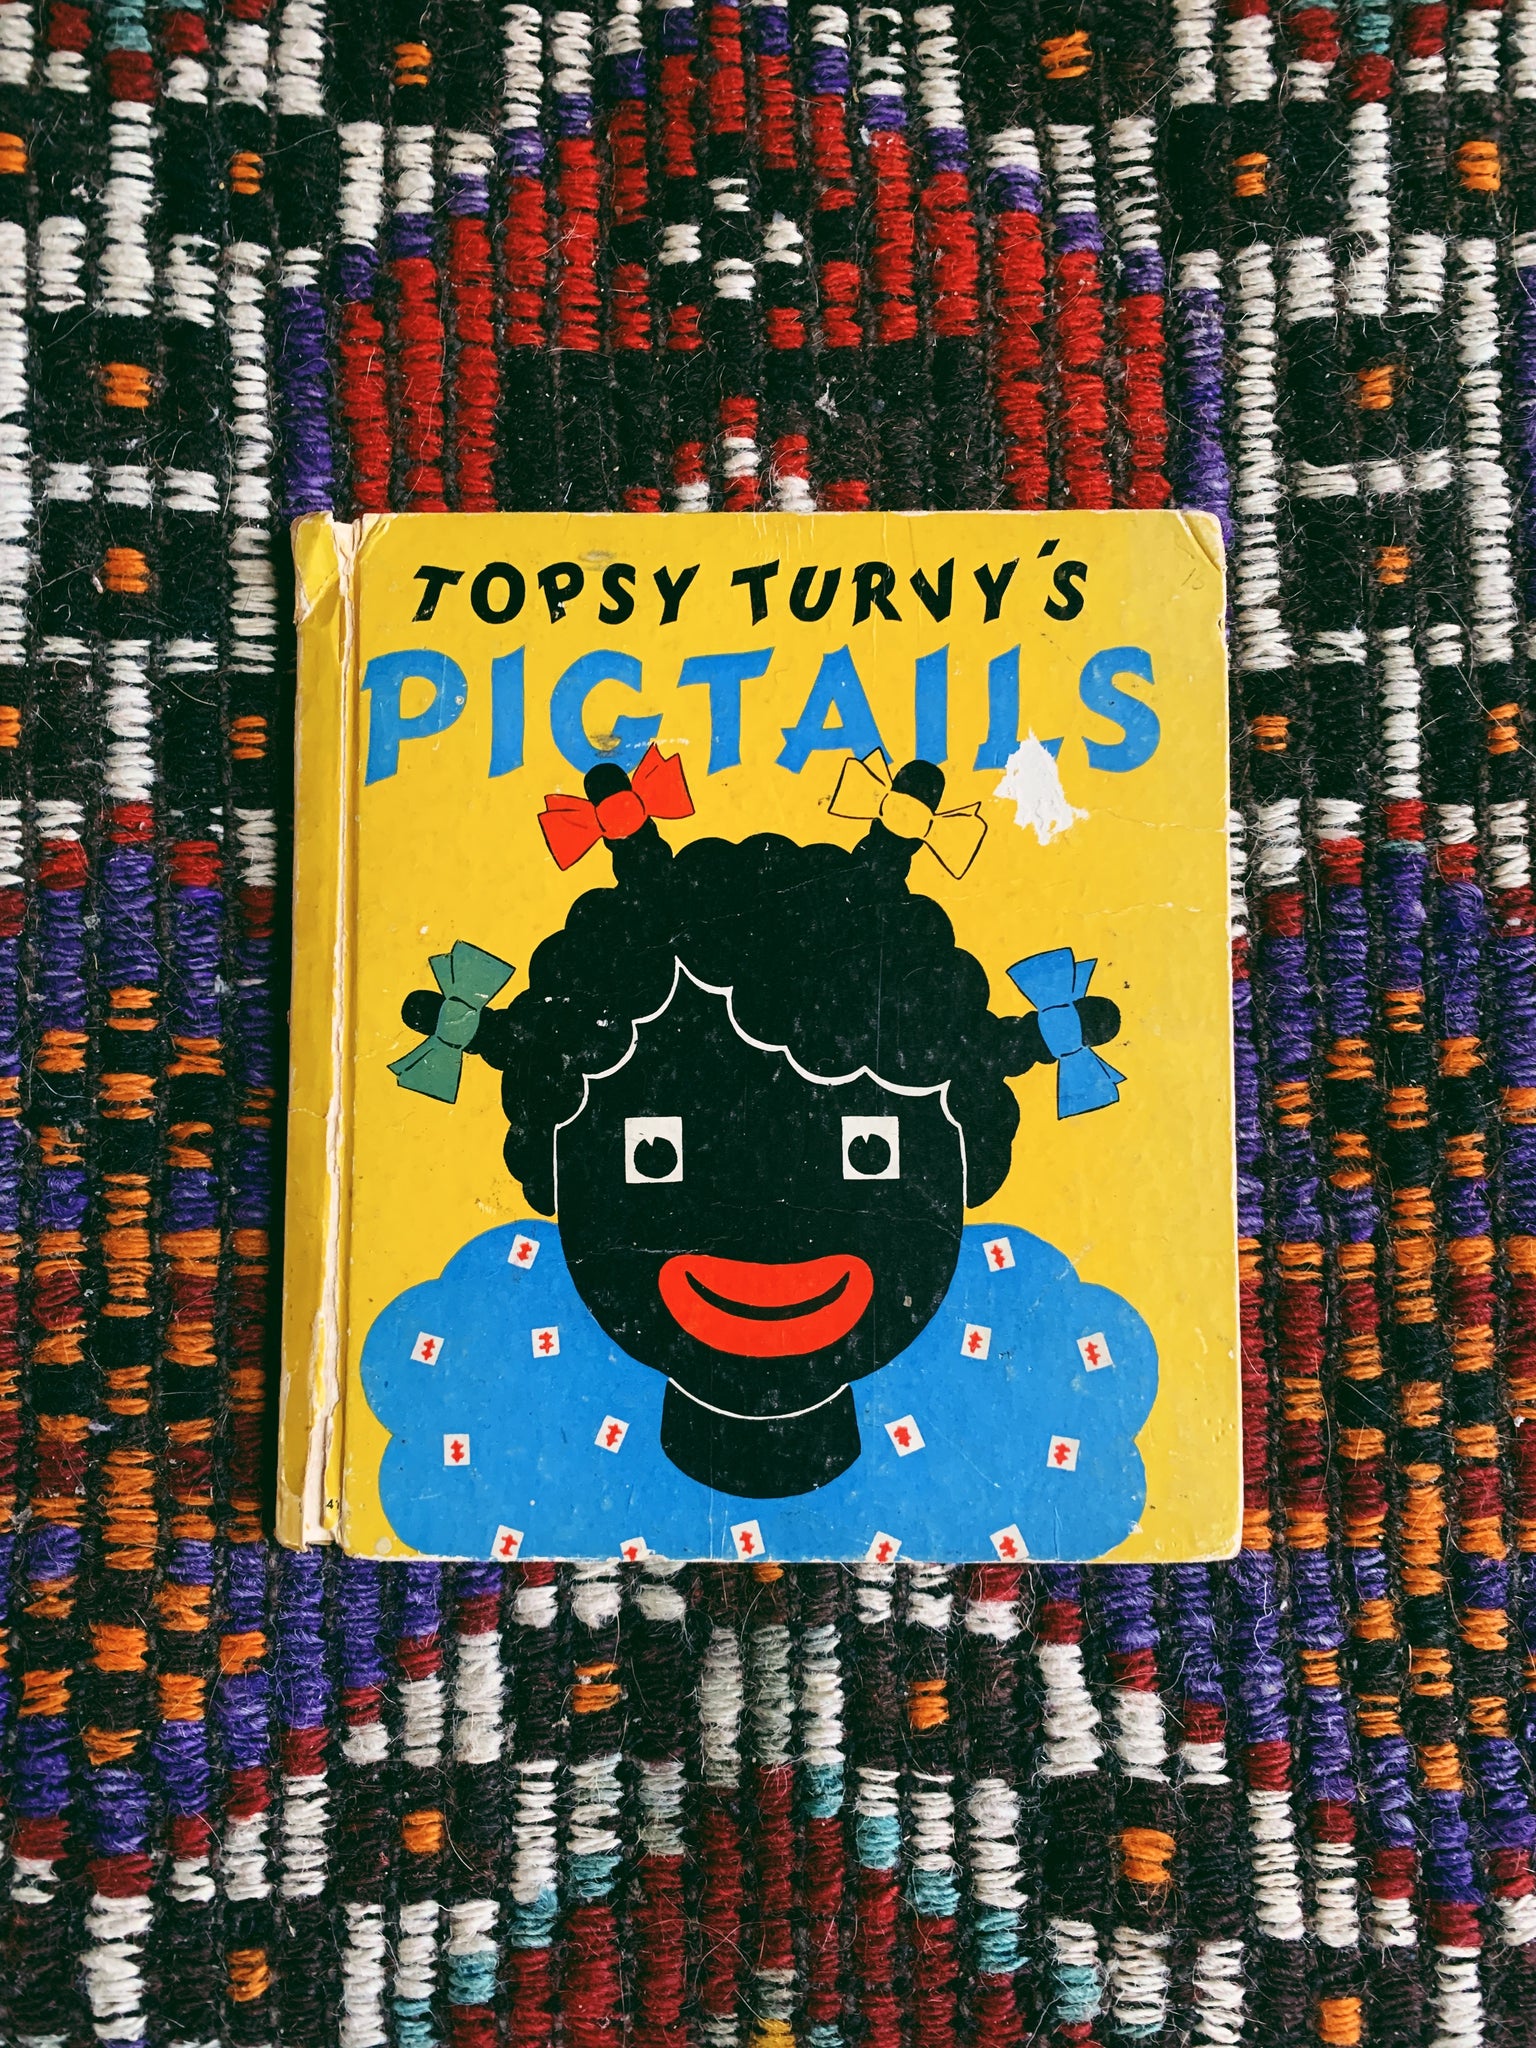 Vintage Hardcover "Topsy Turvy’s Pigtails" by Bernice Anderson (1938)